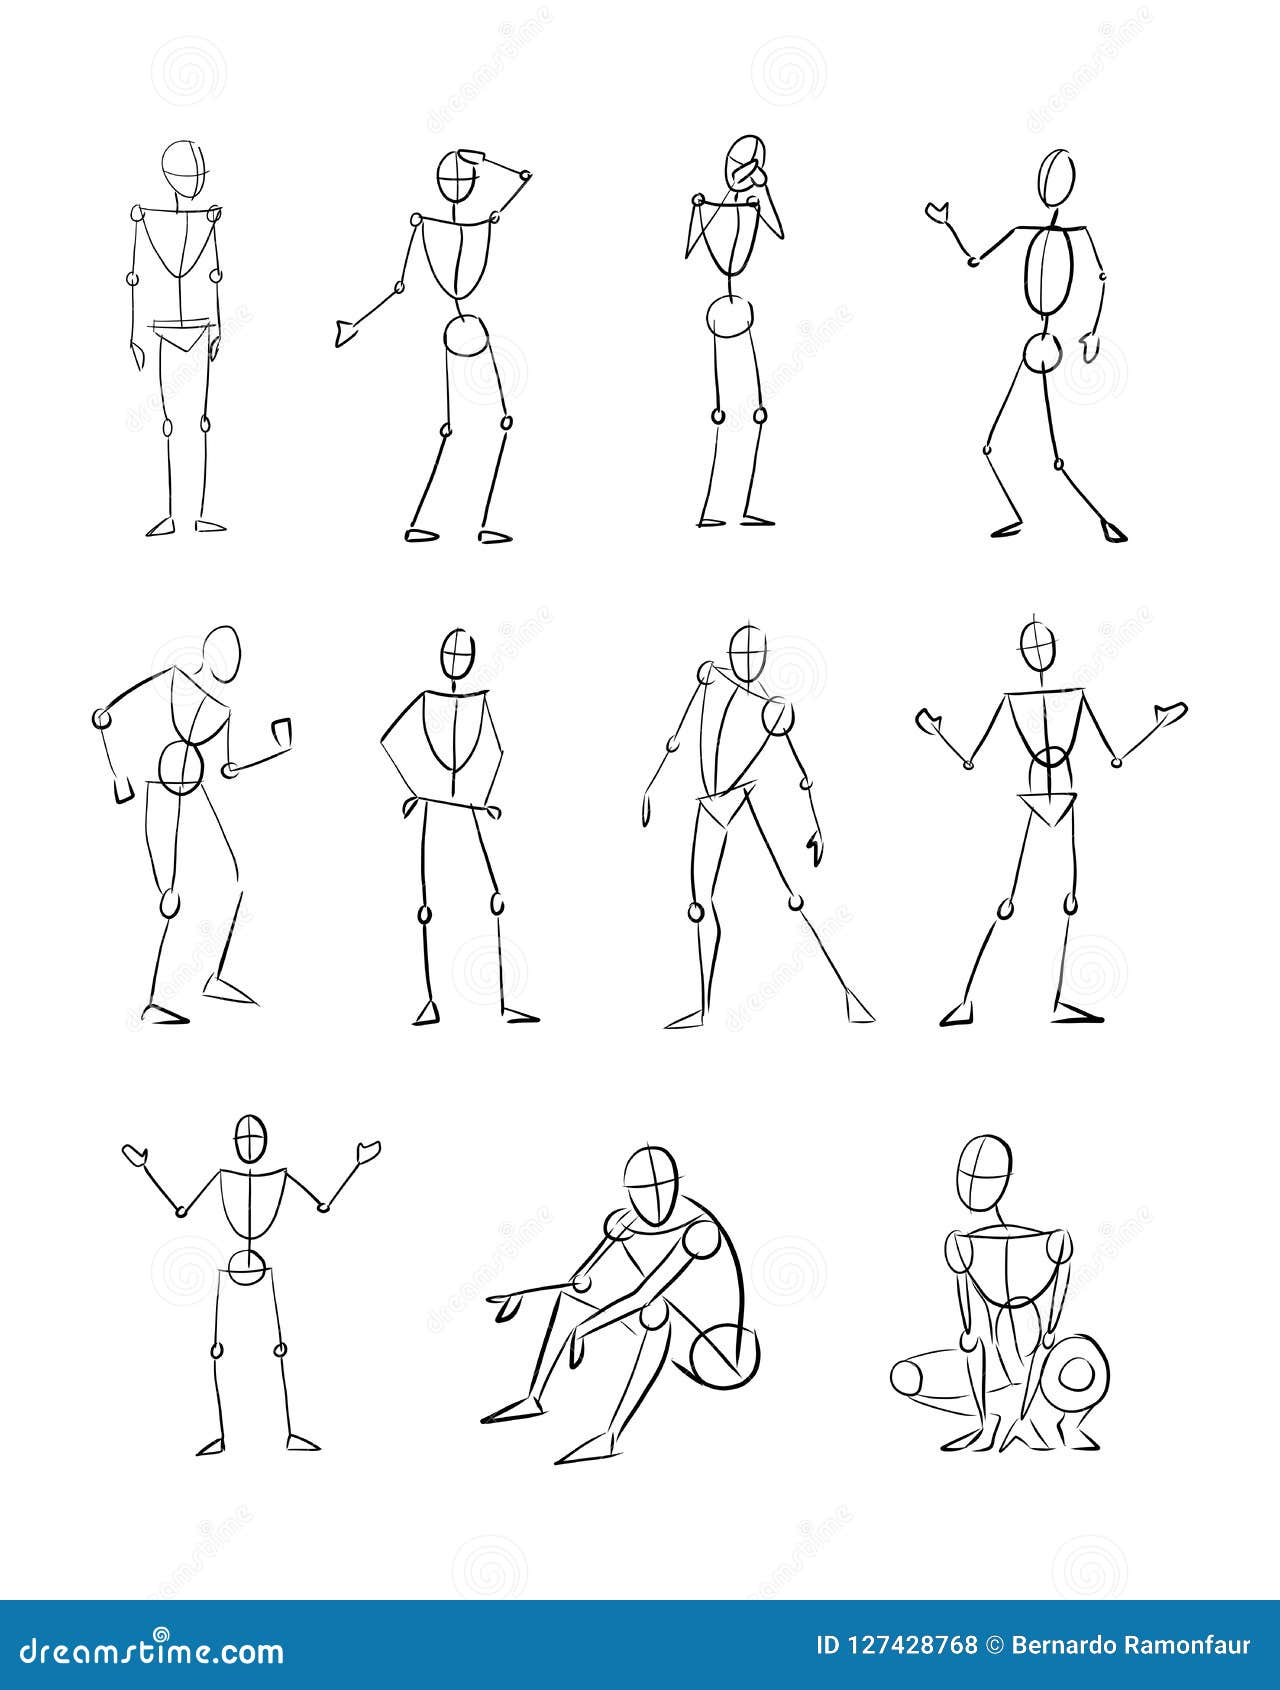 Pin by Mia h on drawing  Drawings Art reference Art reference poses